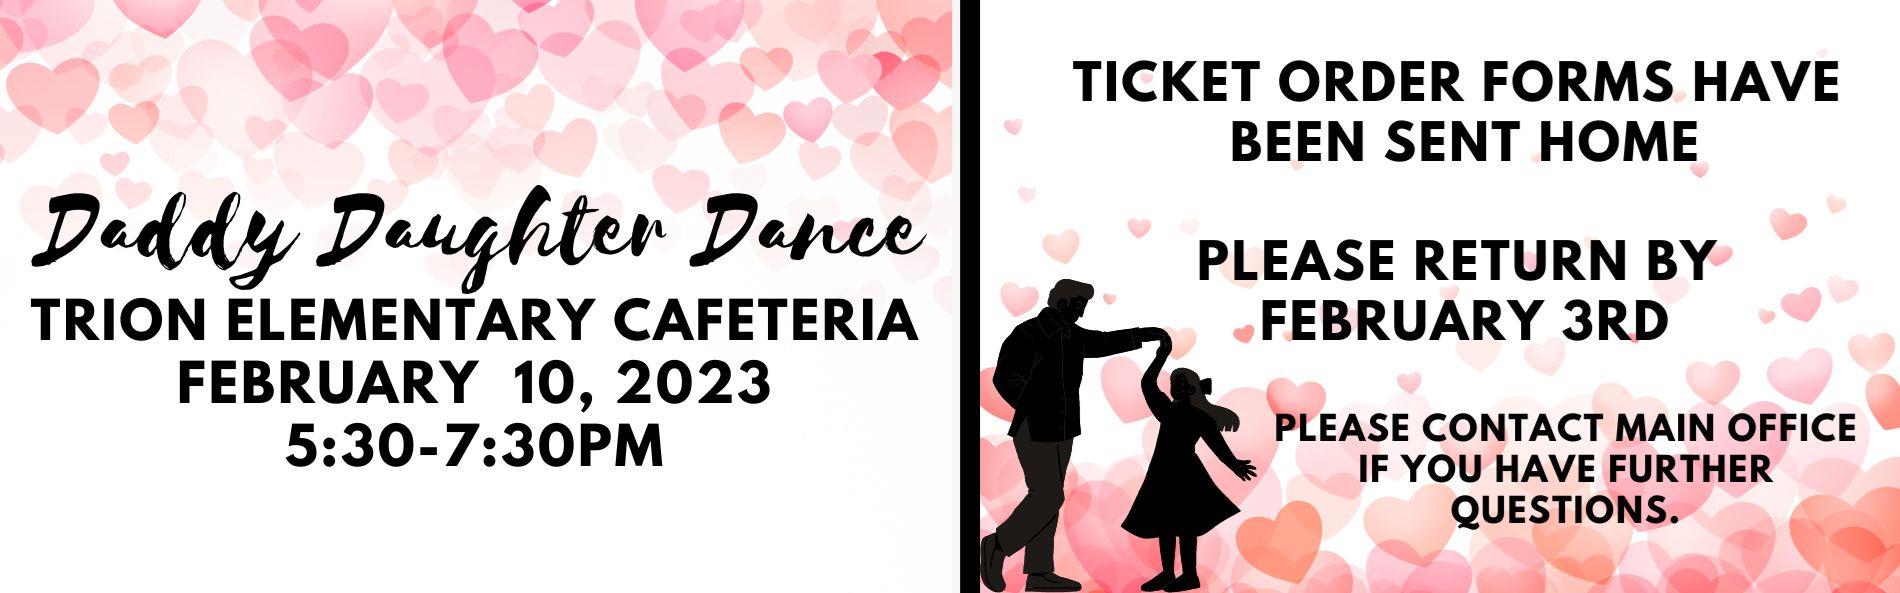 DADDY DAUGHTER DANCE 2023